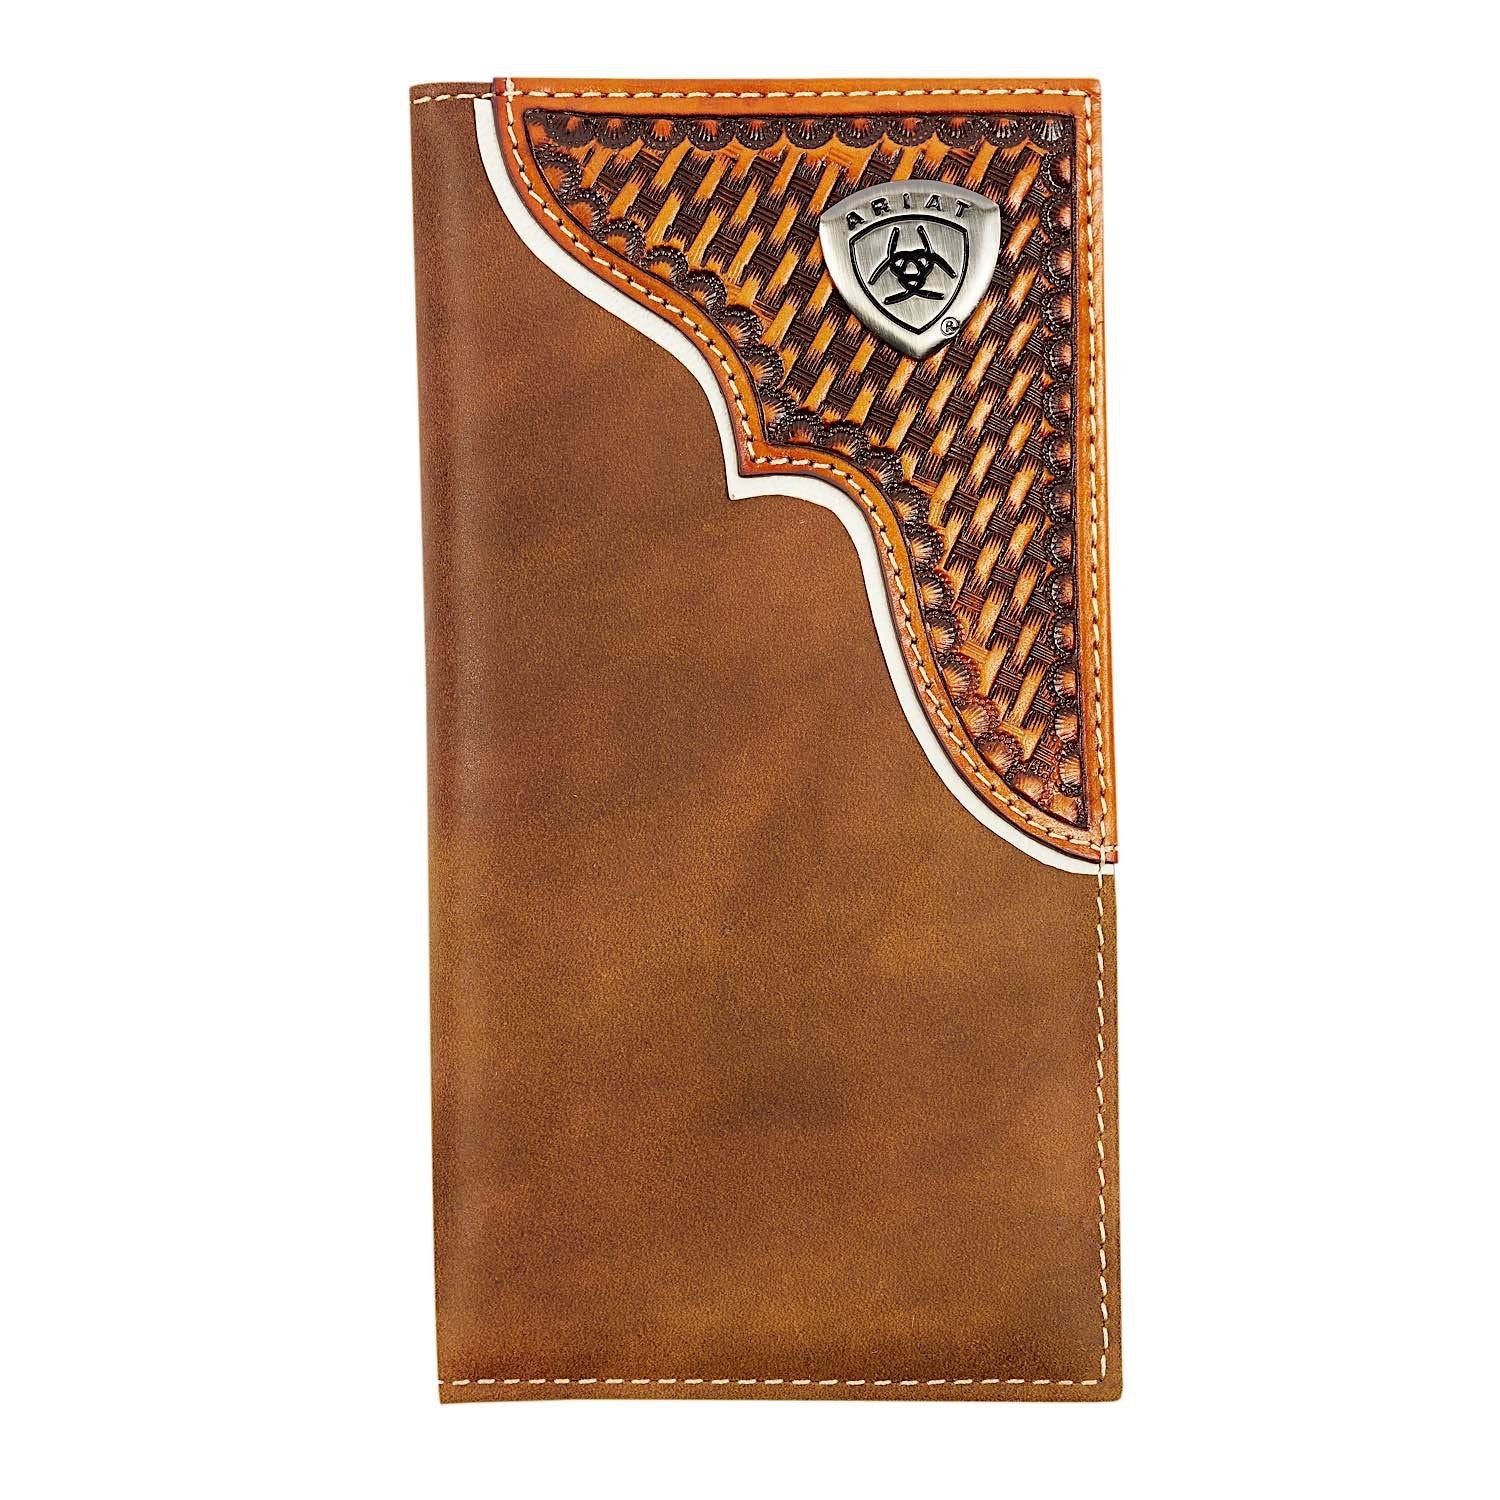 Ariat Rodeo Wallet - WLT1110A (4896469418061)